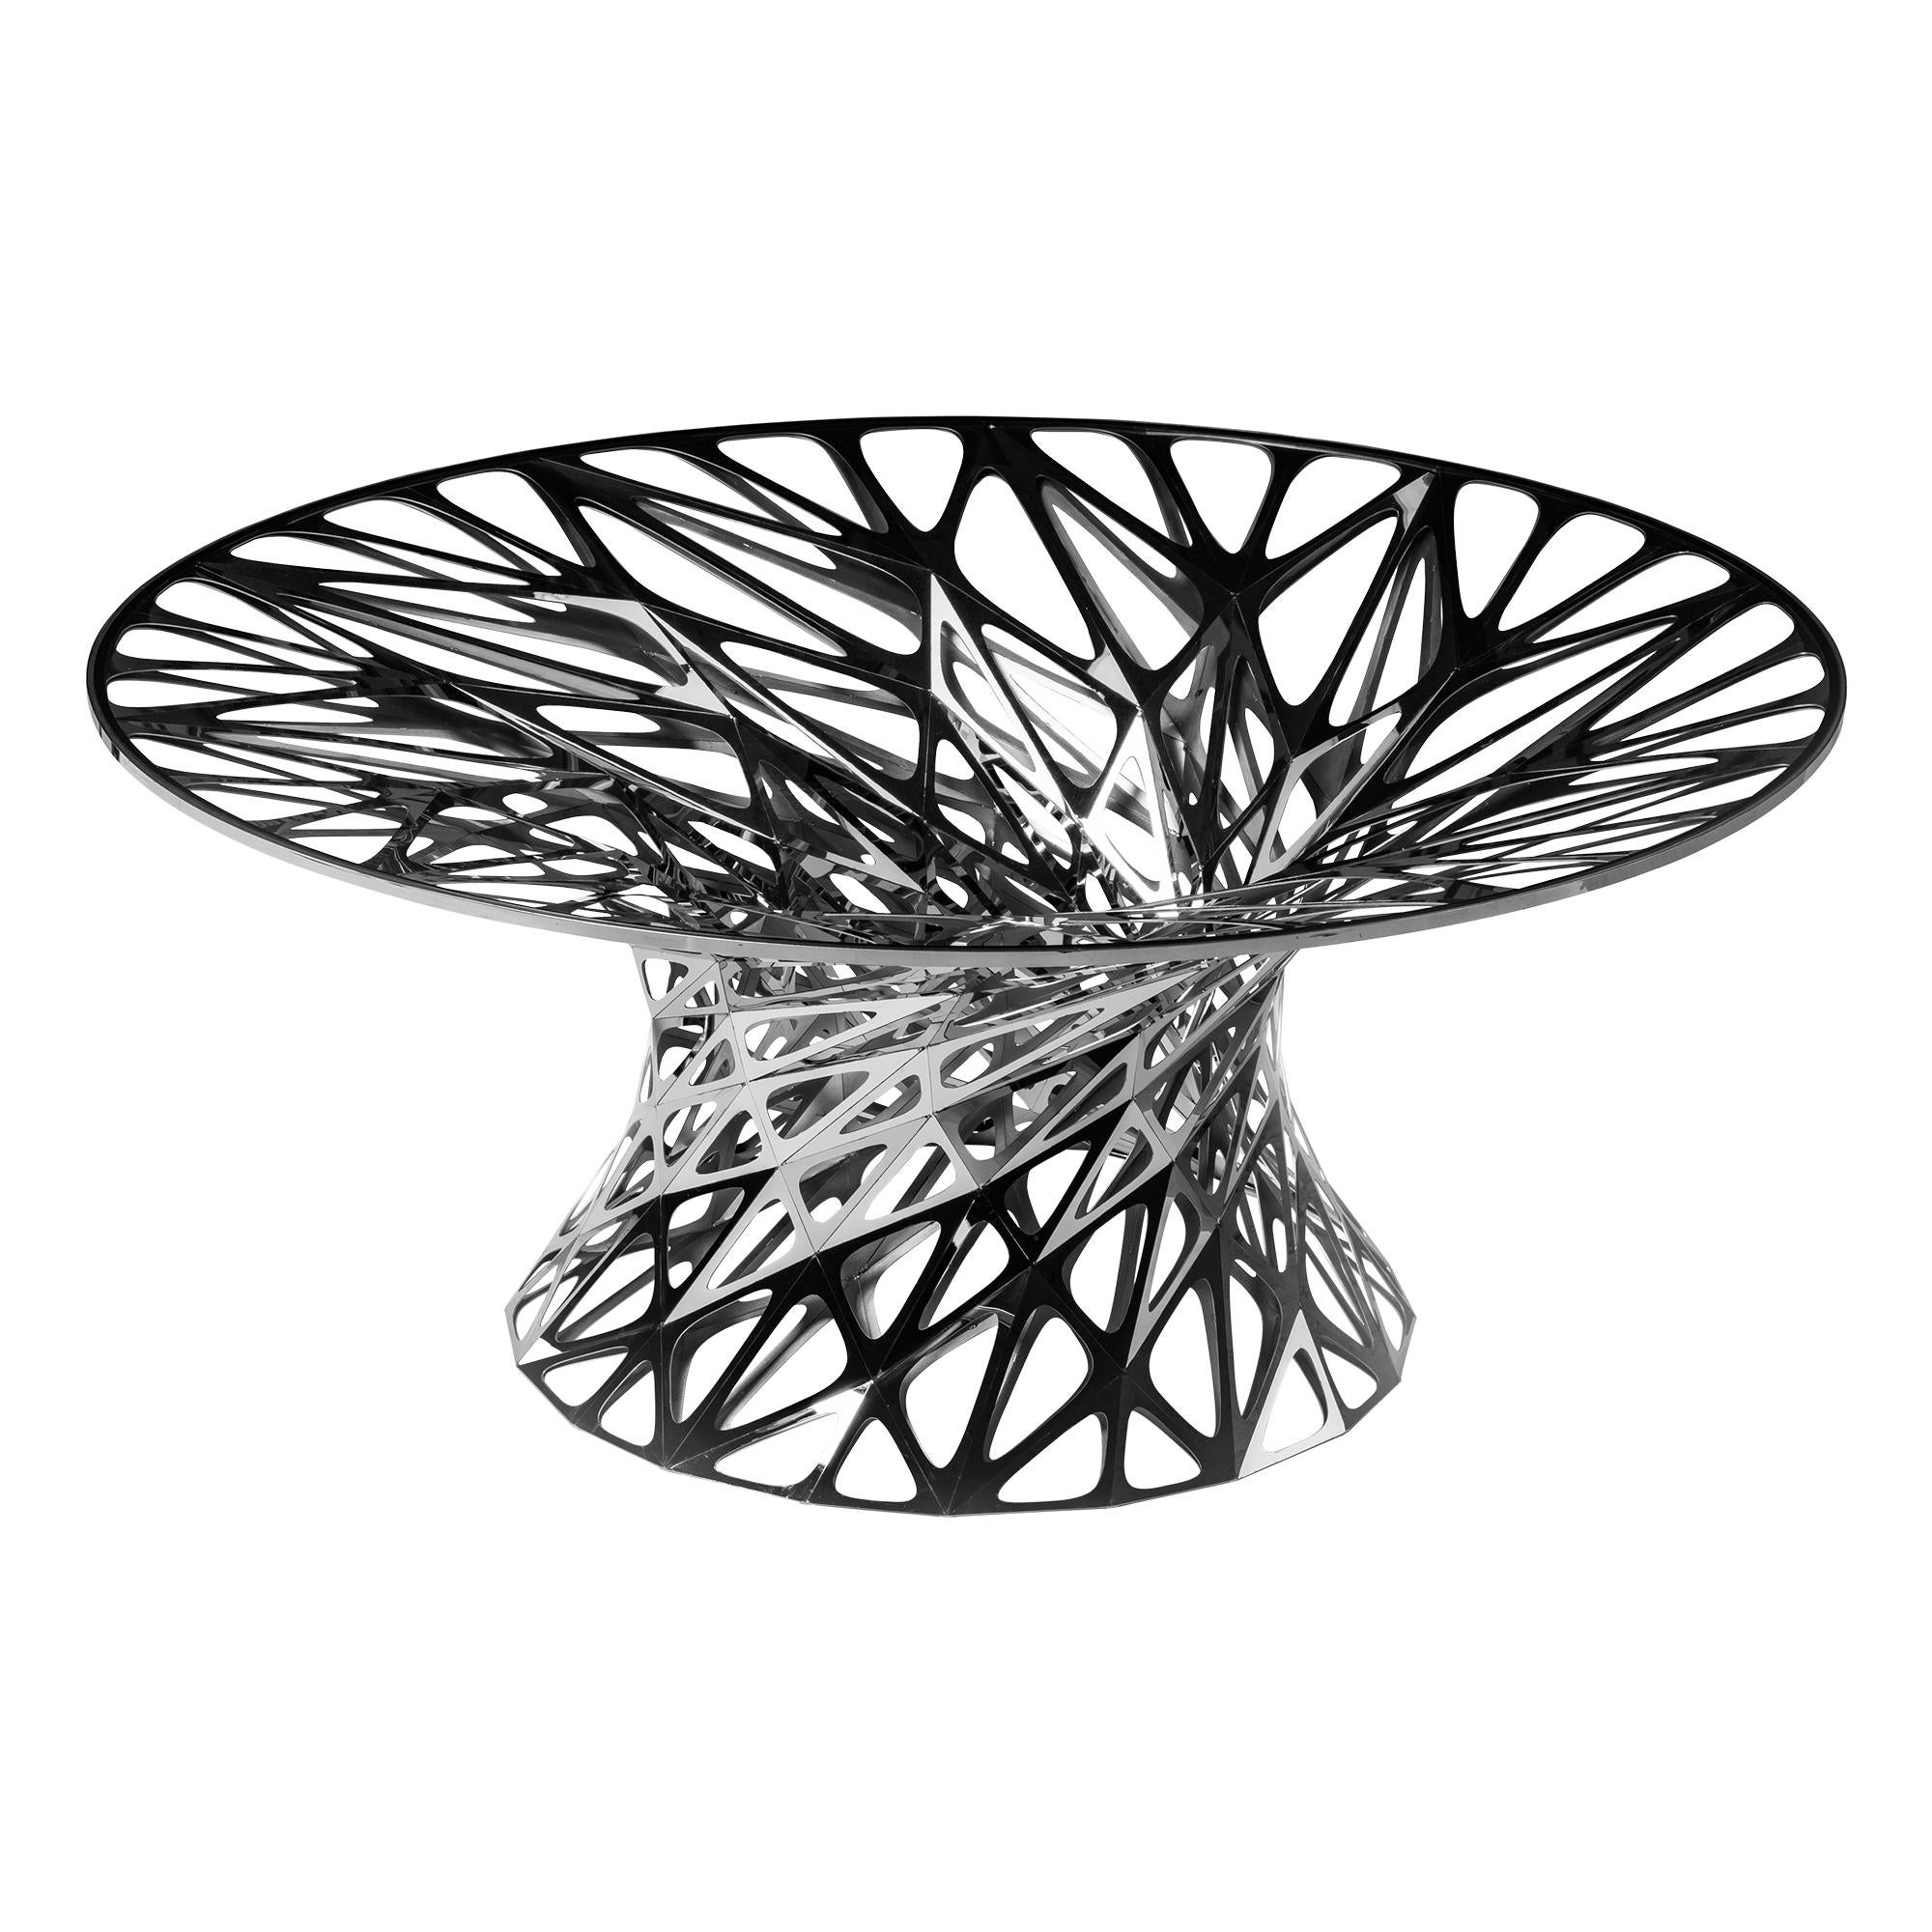 Object #MT-T1-F-L Mirror Polished Stainless Steel Table by Zhoujie Zhang